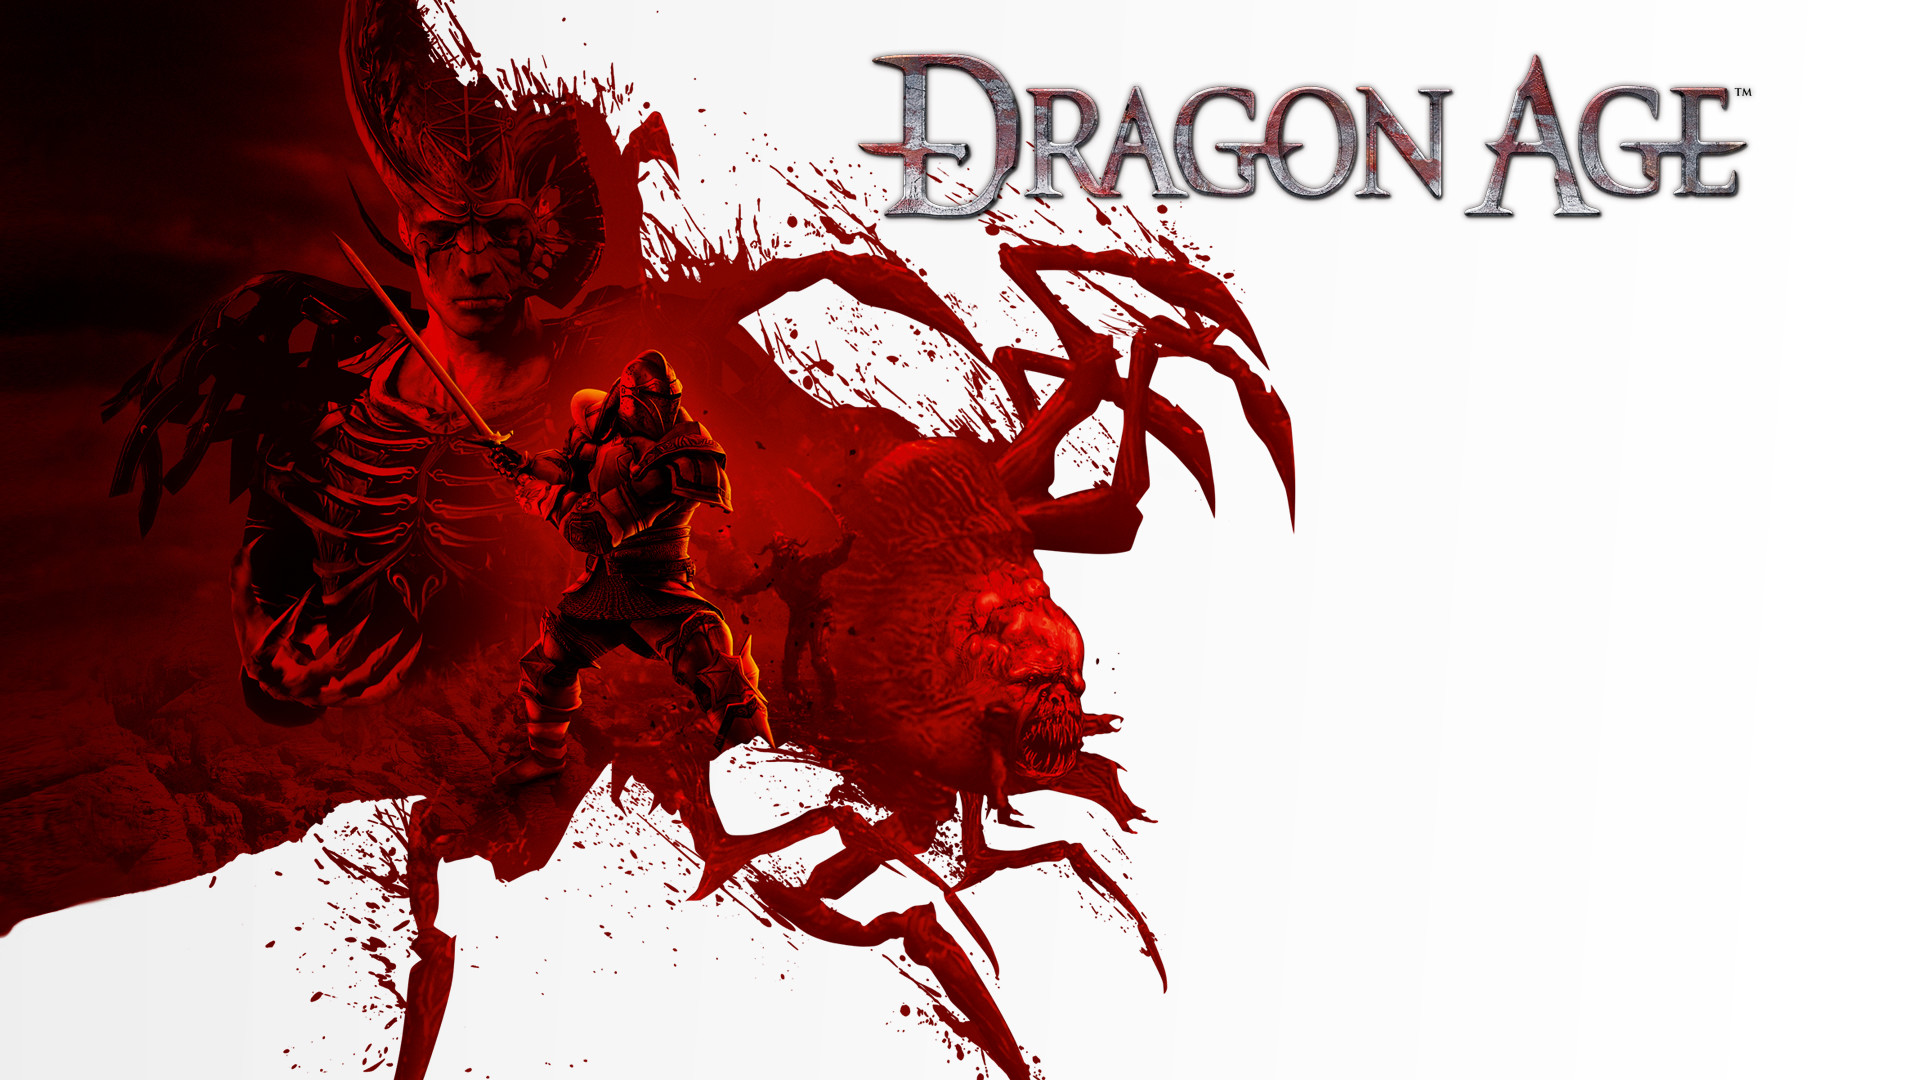 1920x1080 Download Dragon Age Wallpapers Free.